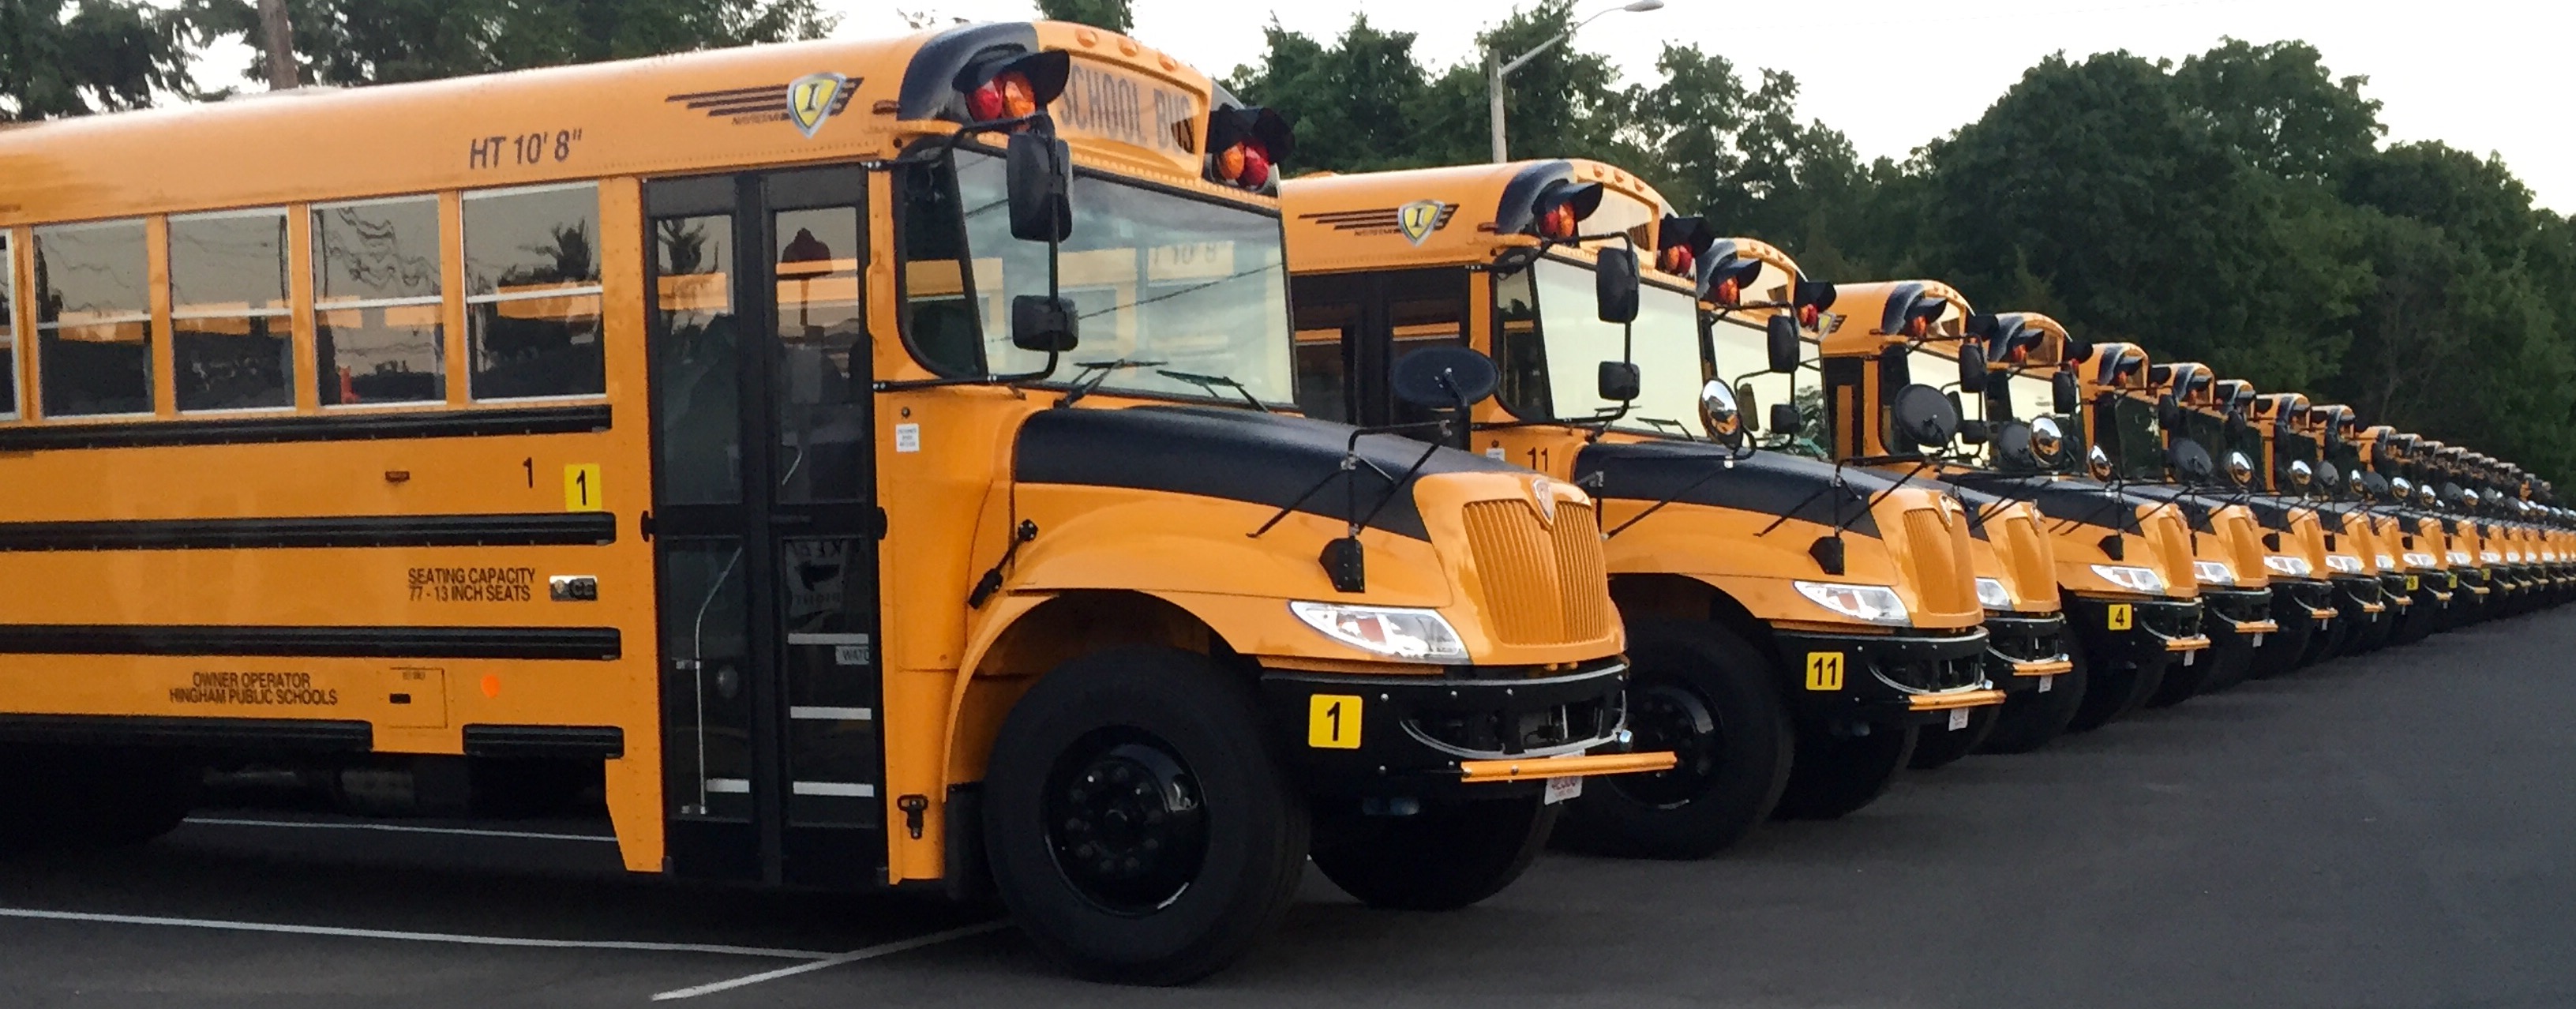 Middle School Bus Routes | School Administration